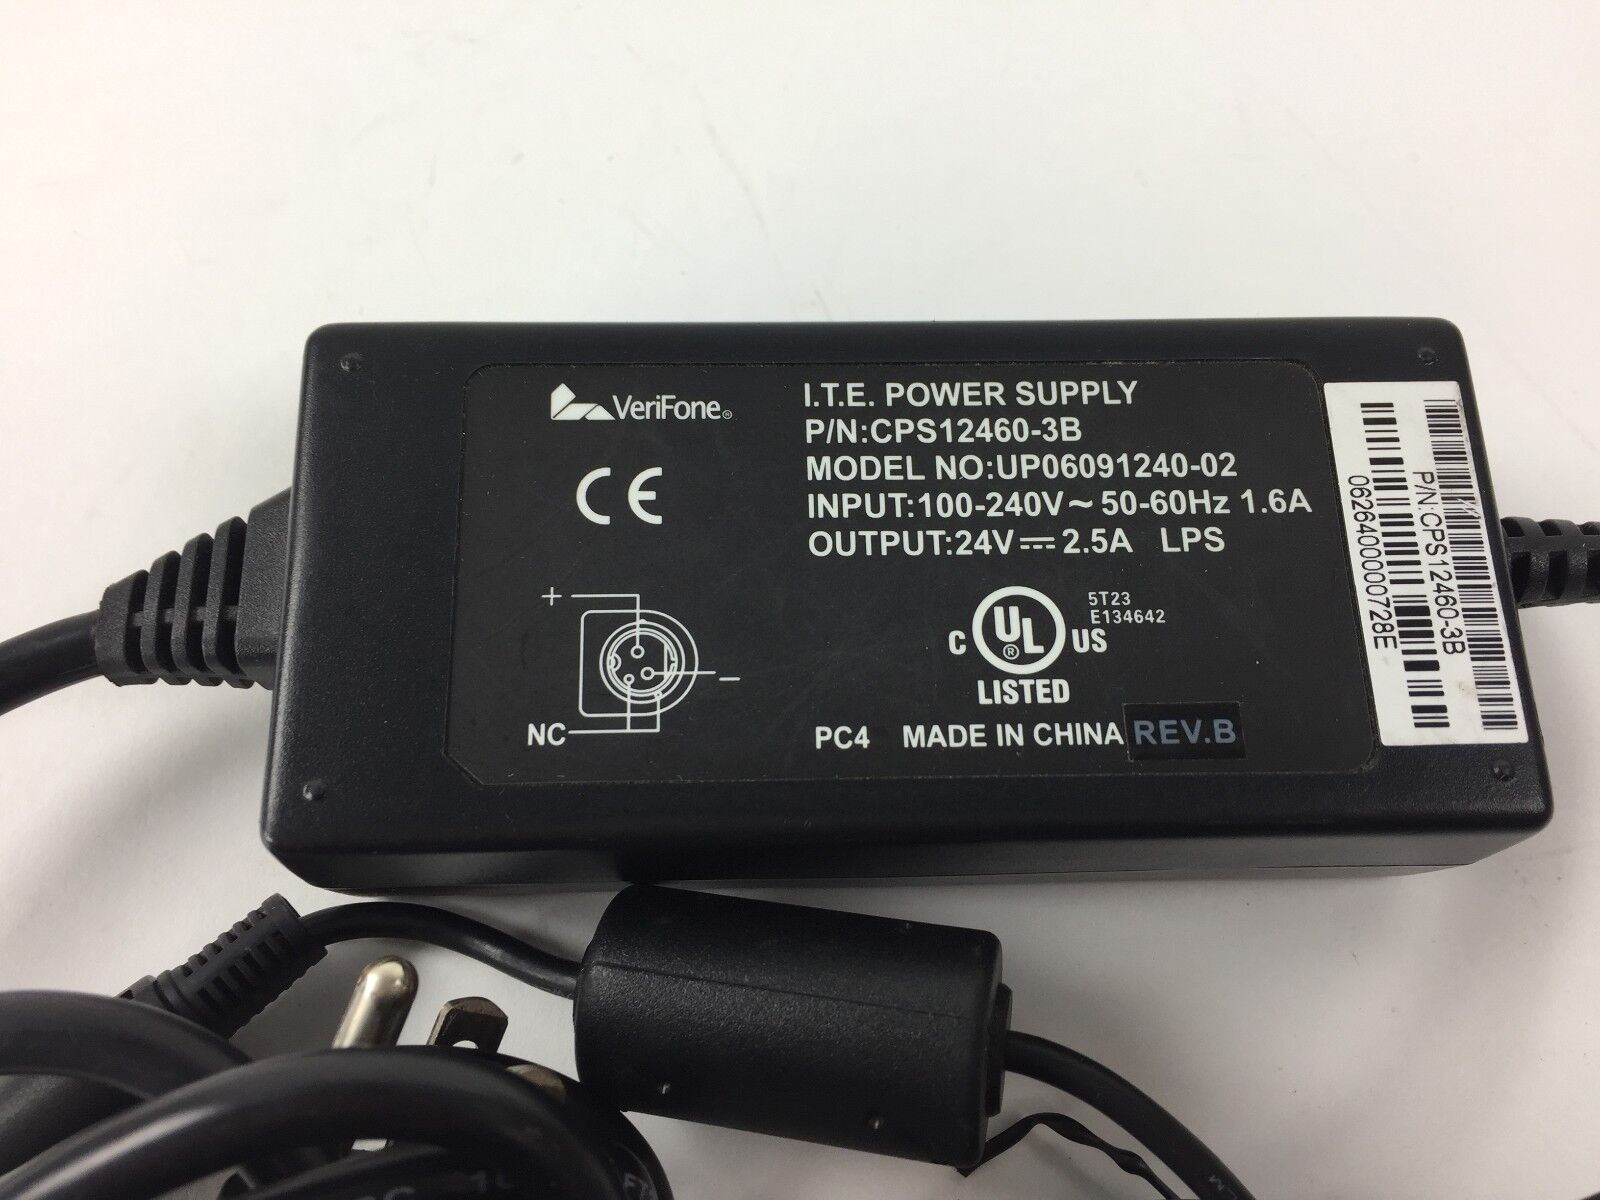 Verifone OMNI Series 3740 ITE CPS12460-3B UP06091240-02 24V Power Supply